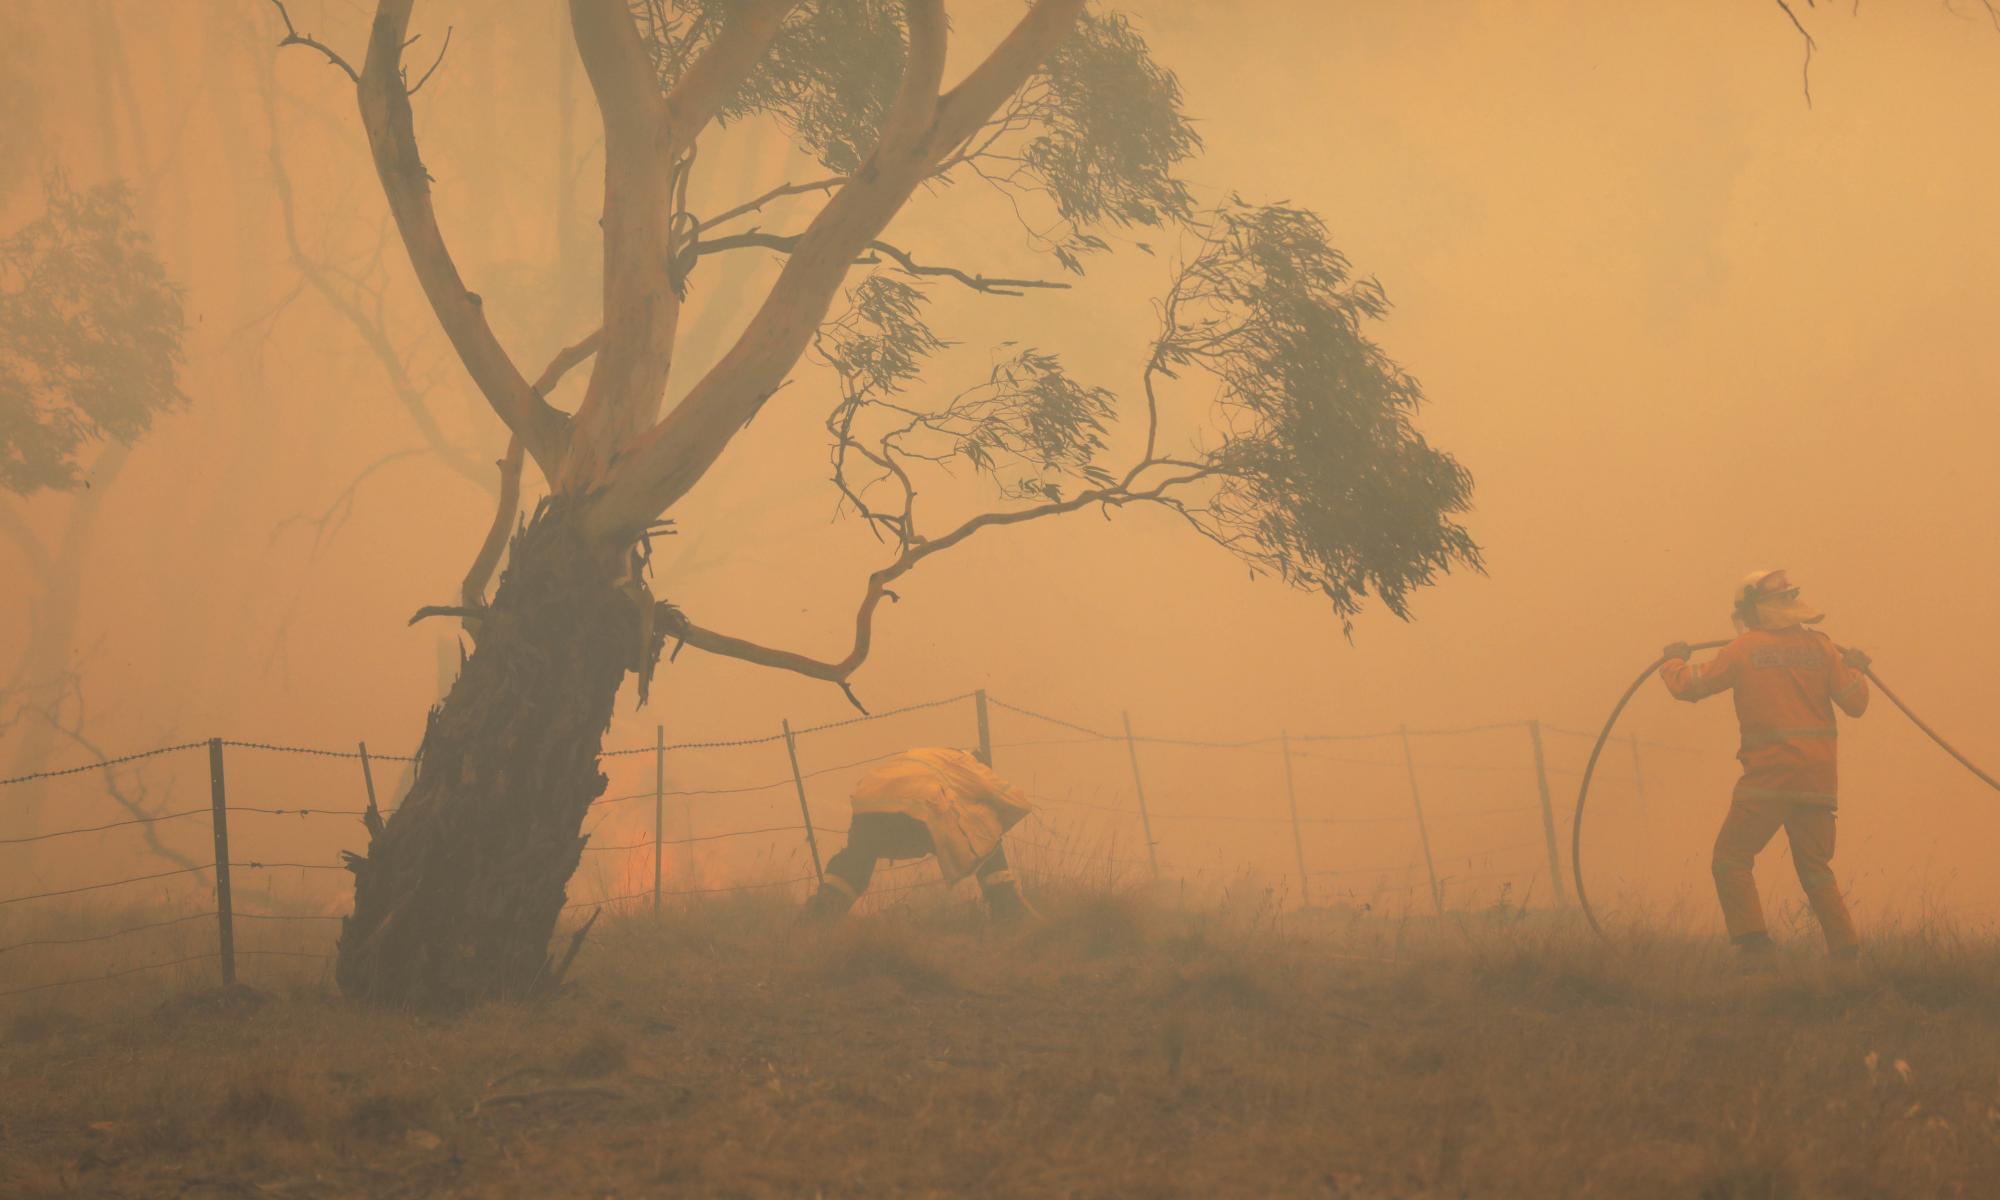 Scientists call on MPs to urgently reduce Australia's emissions amid bushfire crisis